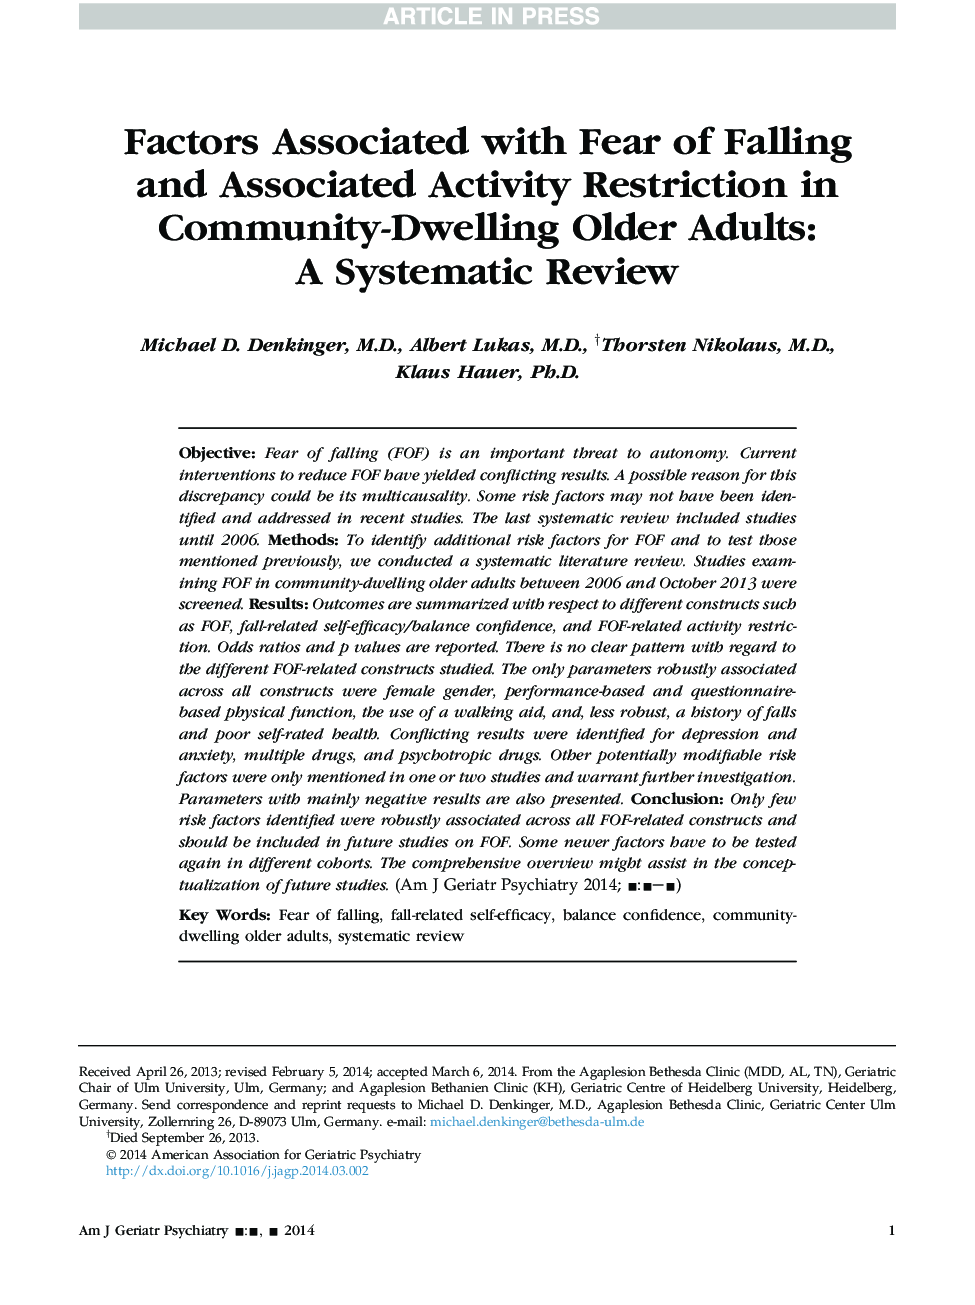 Factors Associated with Fear of Falling andÂ Associated Activity Restriction in Community-Dwelling Older Adults: AÂ Systematic Review